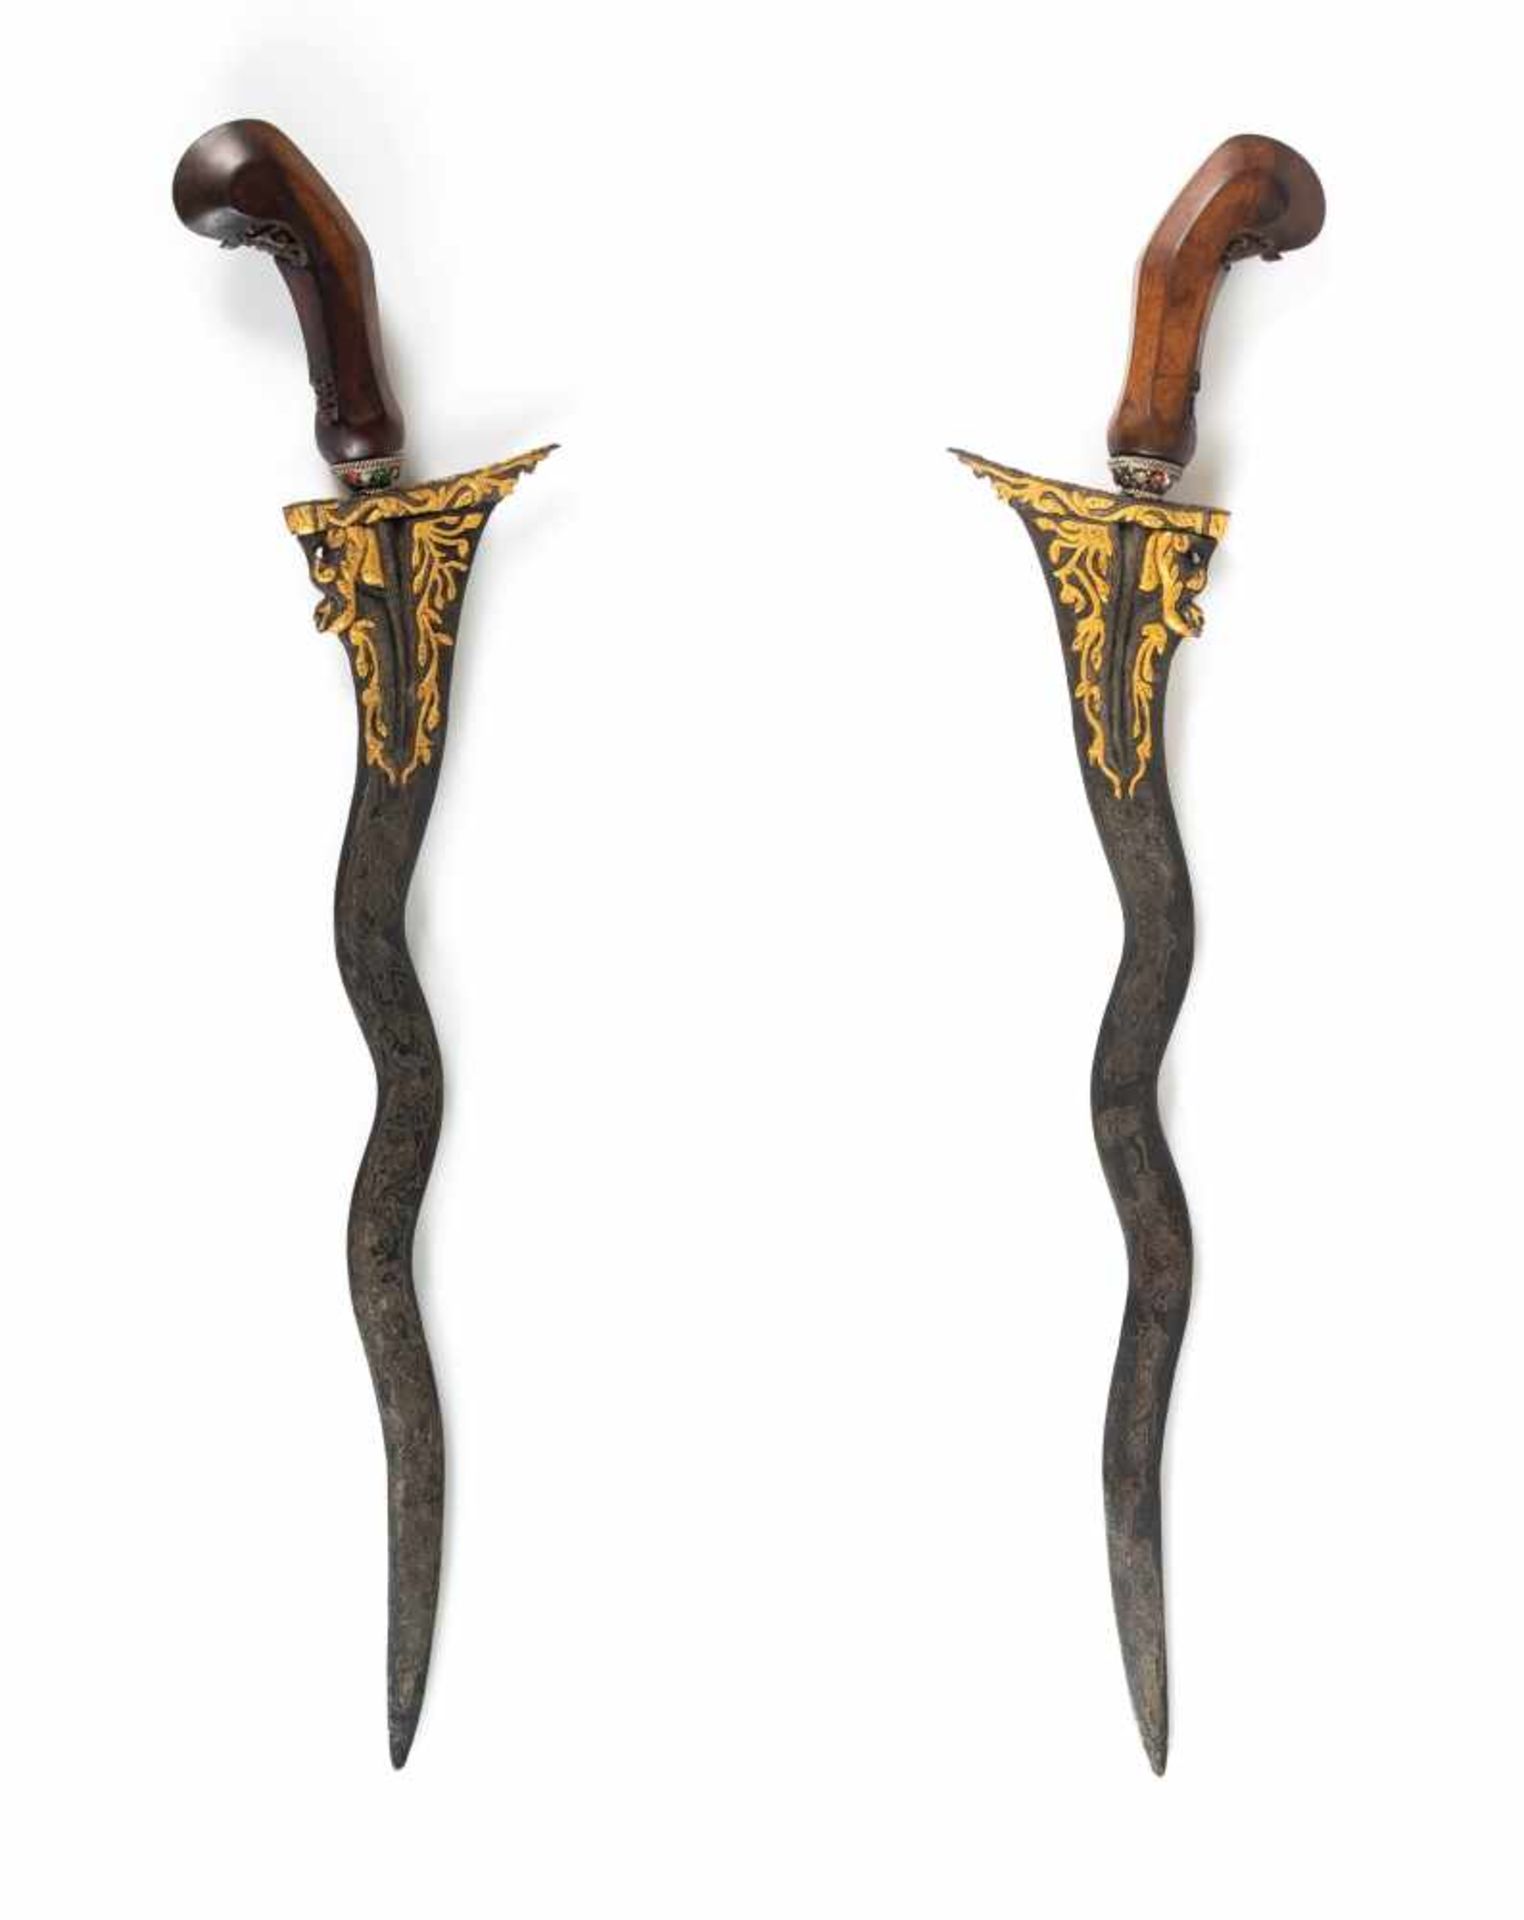 A Javanese Keris Solo, with 18th century blade.A Javanese Keris Solo, with 18th century blade. - Bild 3 aus 8